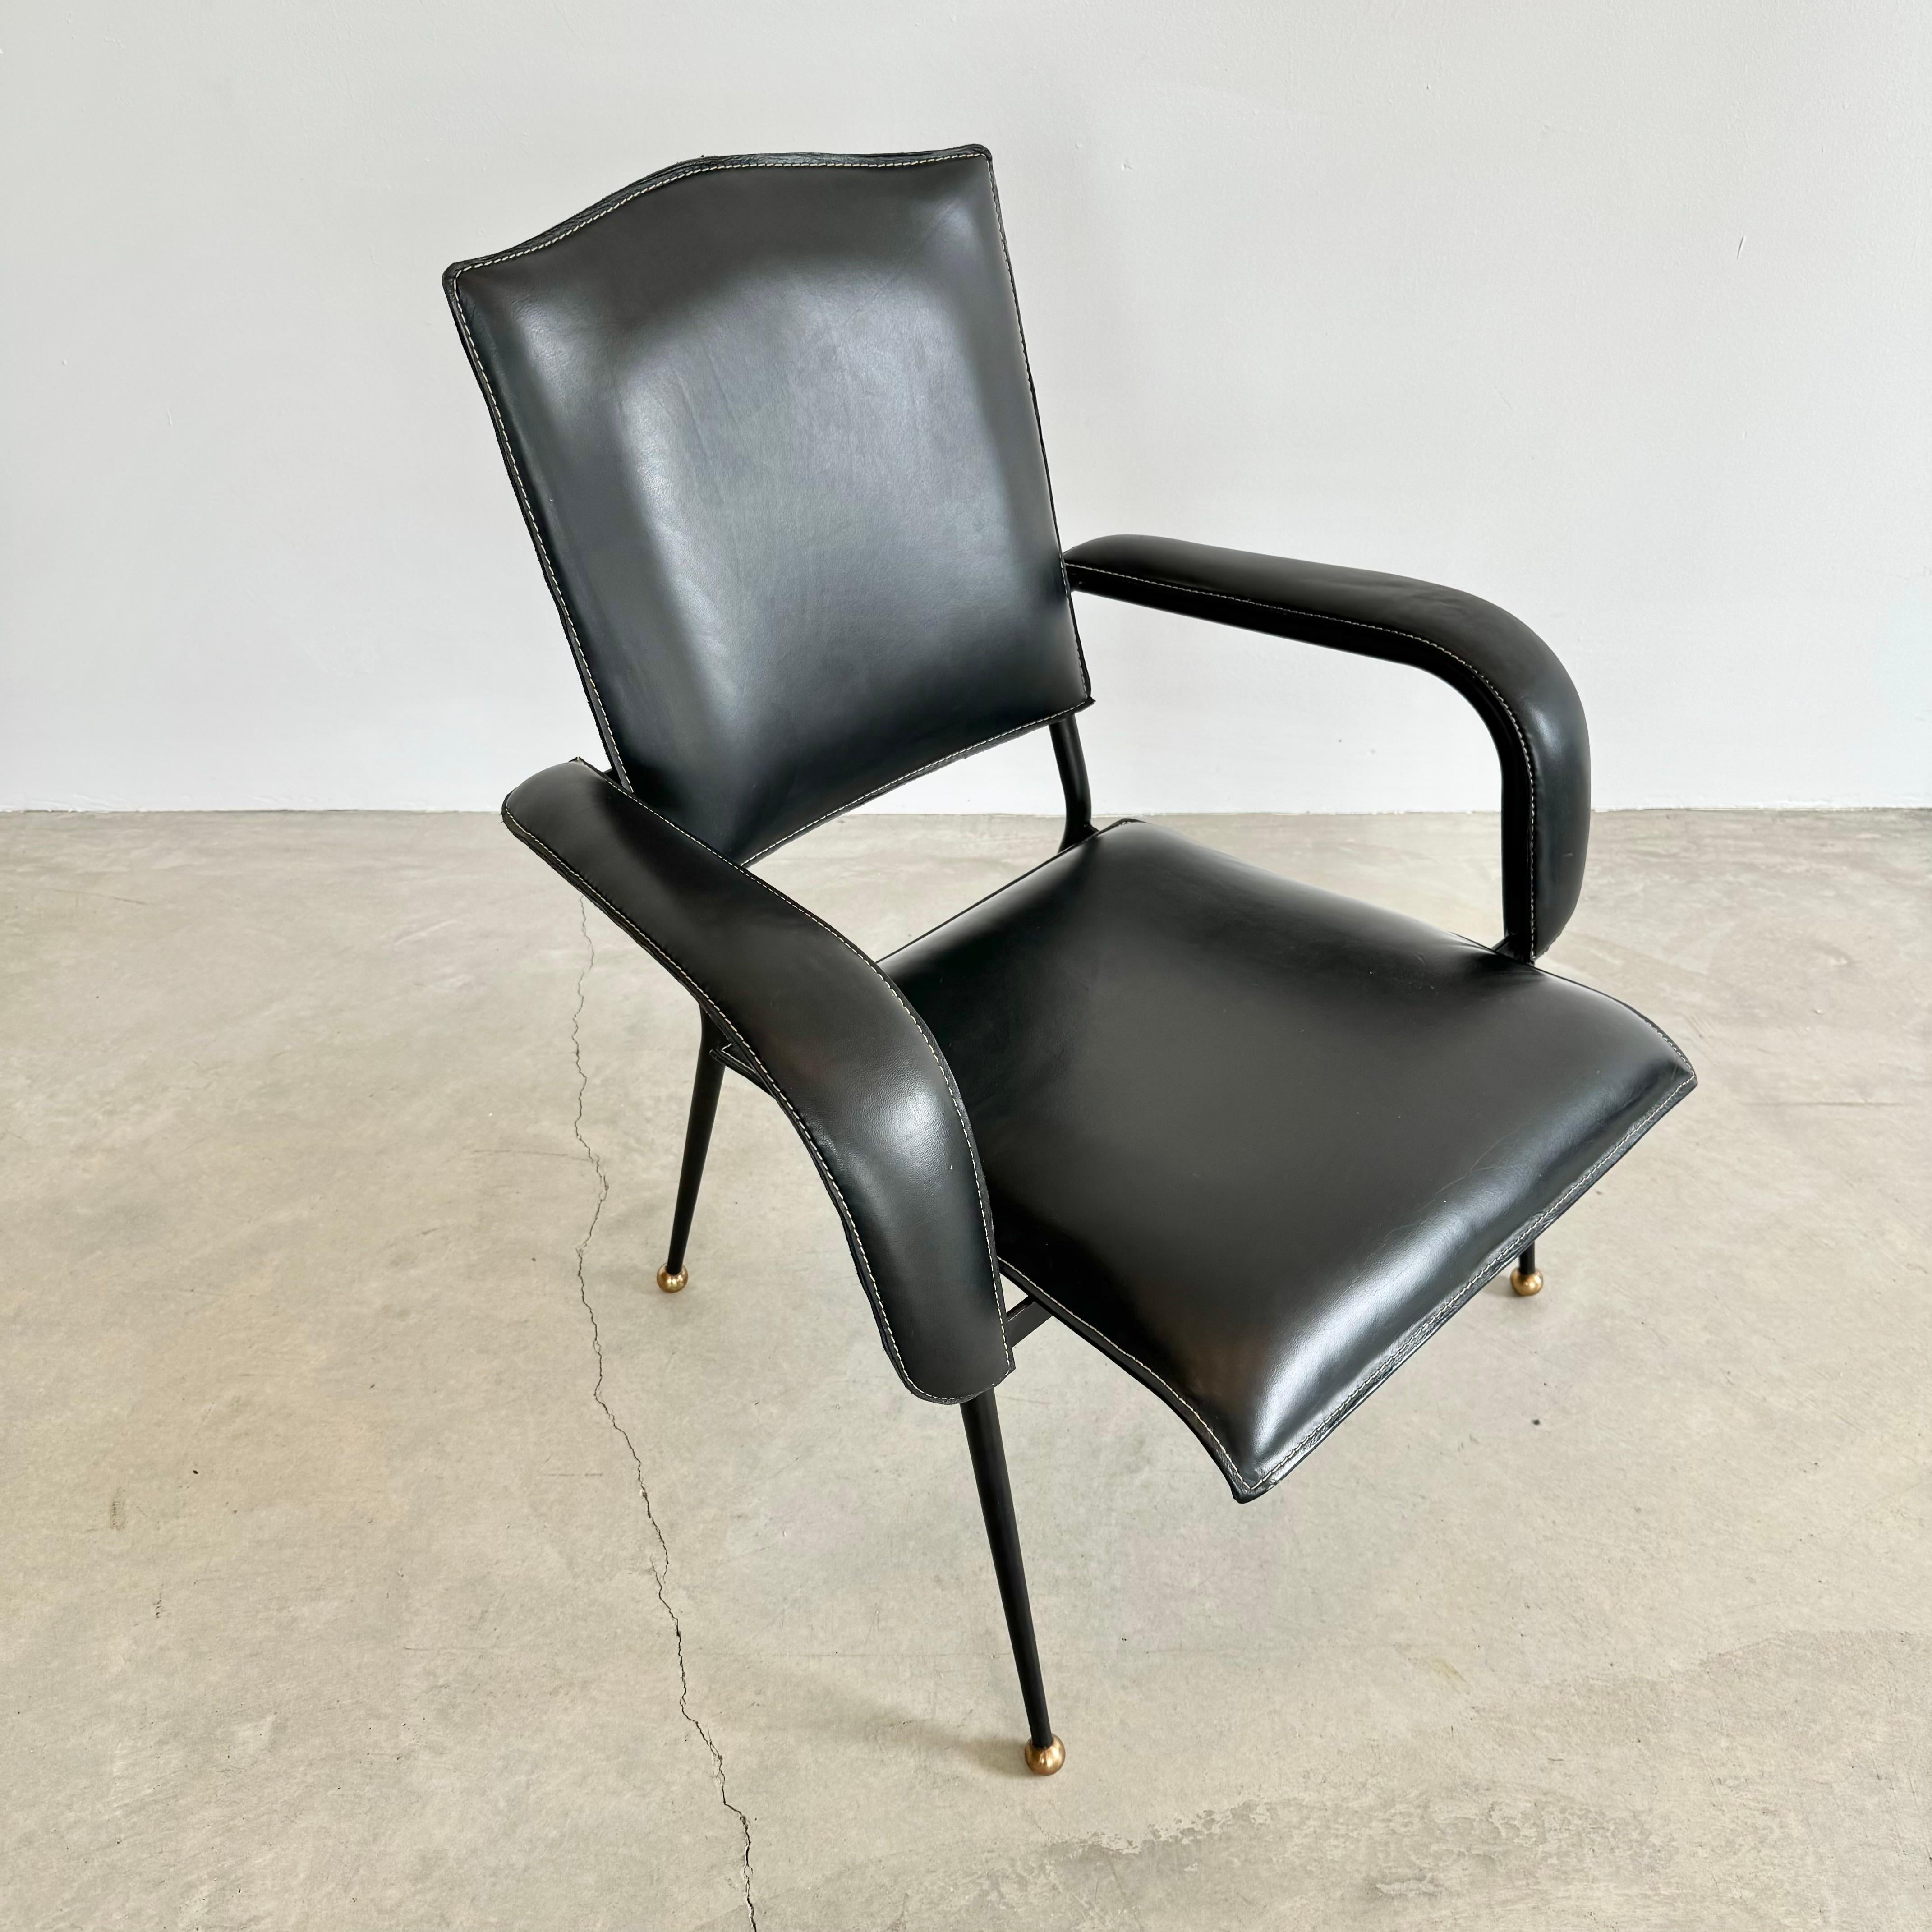 Stunning leather armchair by French designer Jacques Adnet. Black iron frame sitting atop brass ball feet. Black leather seat, seat back and arm rests with signature Adnet contrast stitch at the seams. Good vintage condition. Extremely comfortable.